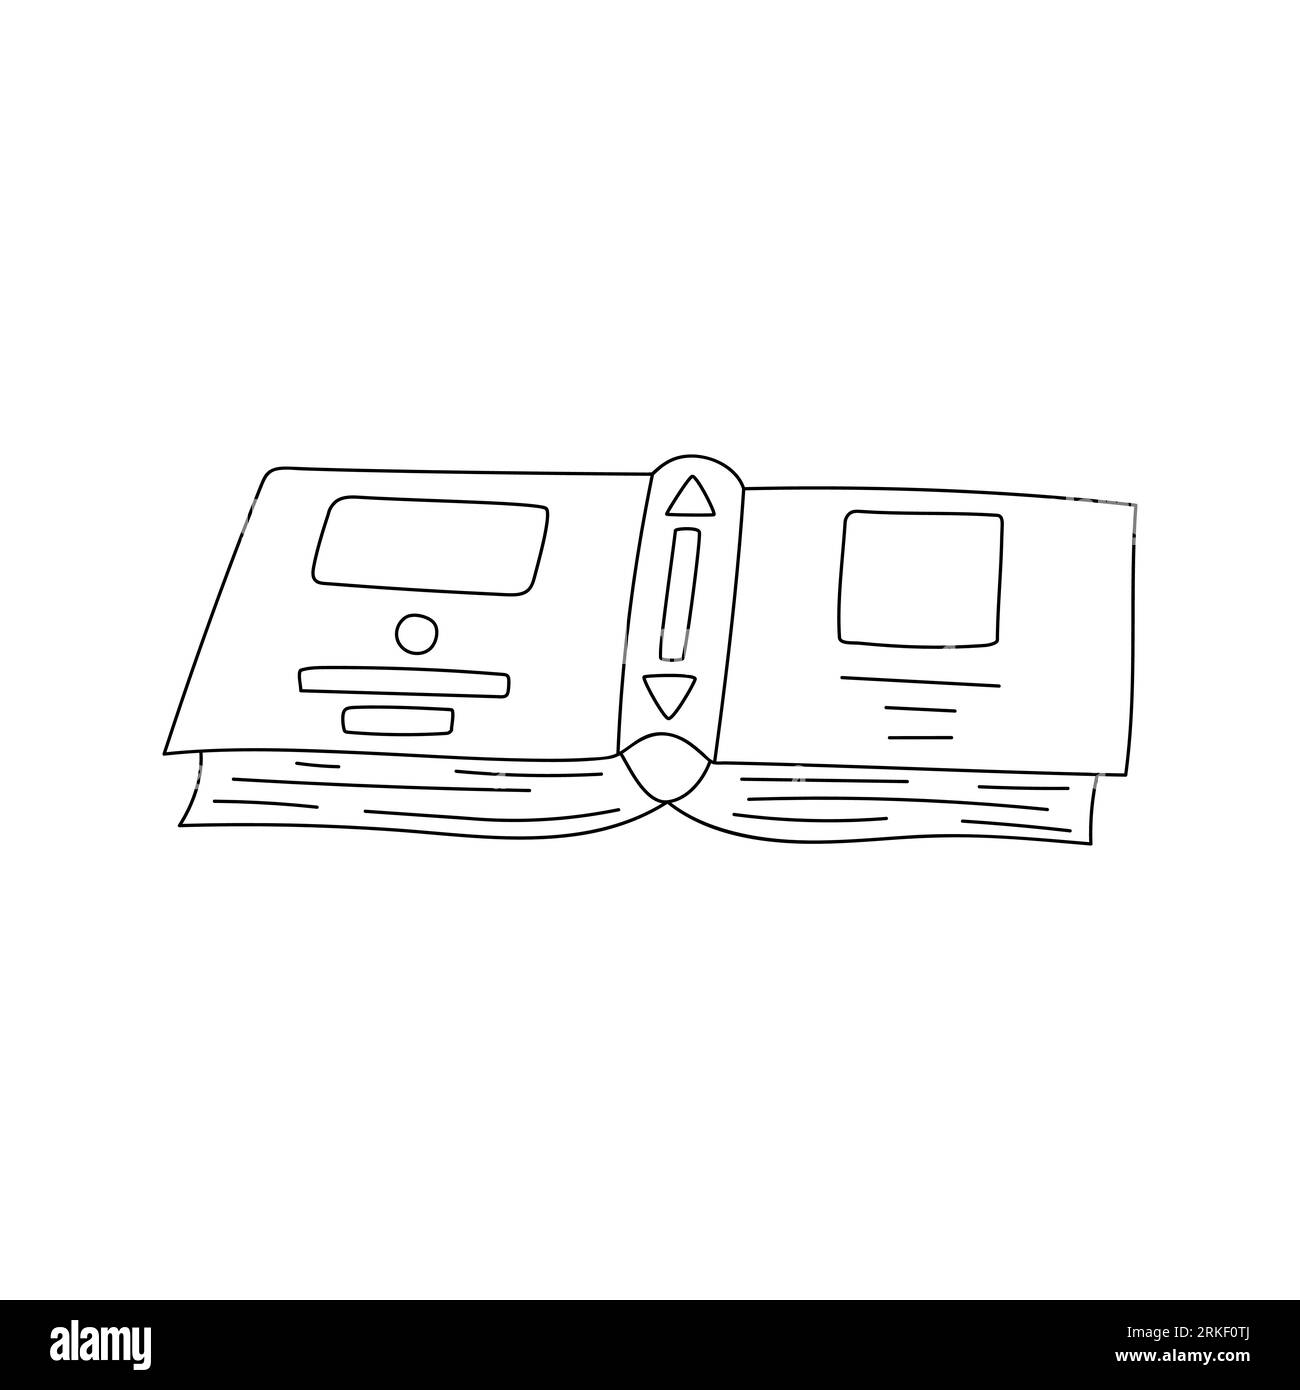 Hand drawn open book lies on the table, its pages turned facing downward. Unfinished book in doodle style. Black and white outline vector illustration Stock Vector